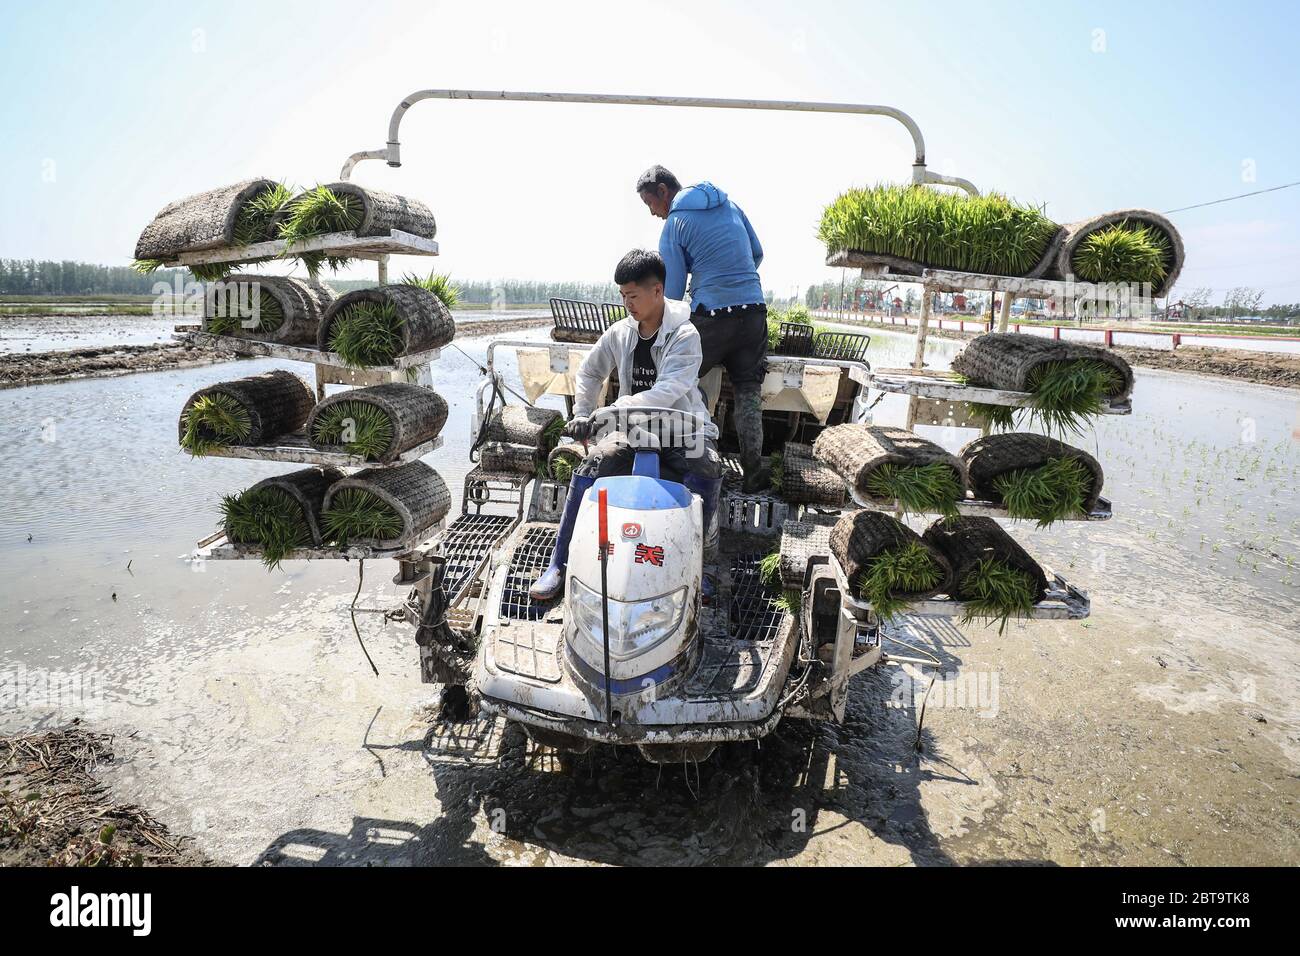 Panjin, China's Liaoning Province. 24th May, 2020. Farmers operate a rice transplanter to plant rice seedlings in Dawa District in Panjin City, northeast China's Liaoning Province, May 24, 2020. Rice transplanting of over 1.59 million mu (about 106,000 hectares) paddy fields in Panjin, the main rice producing area in Liaoning, has started recently. Credit: Pan Yulong/Xinhua/Alamy Live News Stock Photo